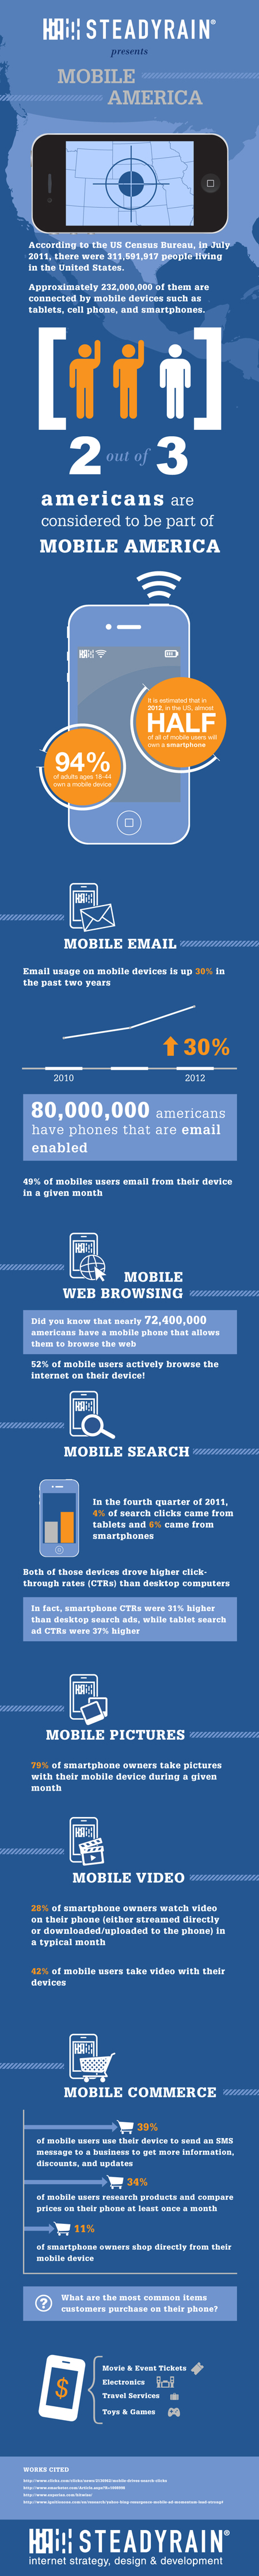 Mobile-In-America-infographic